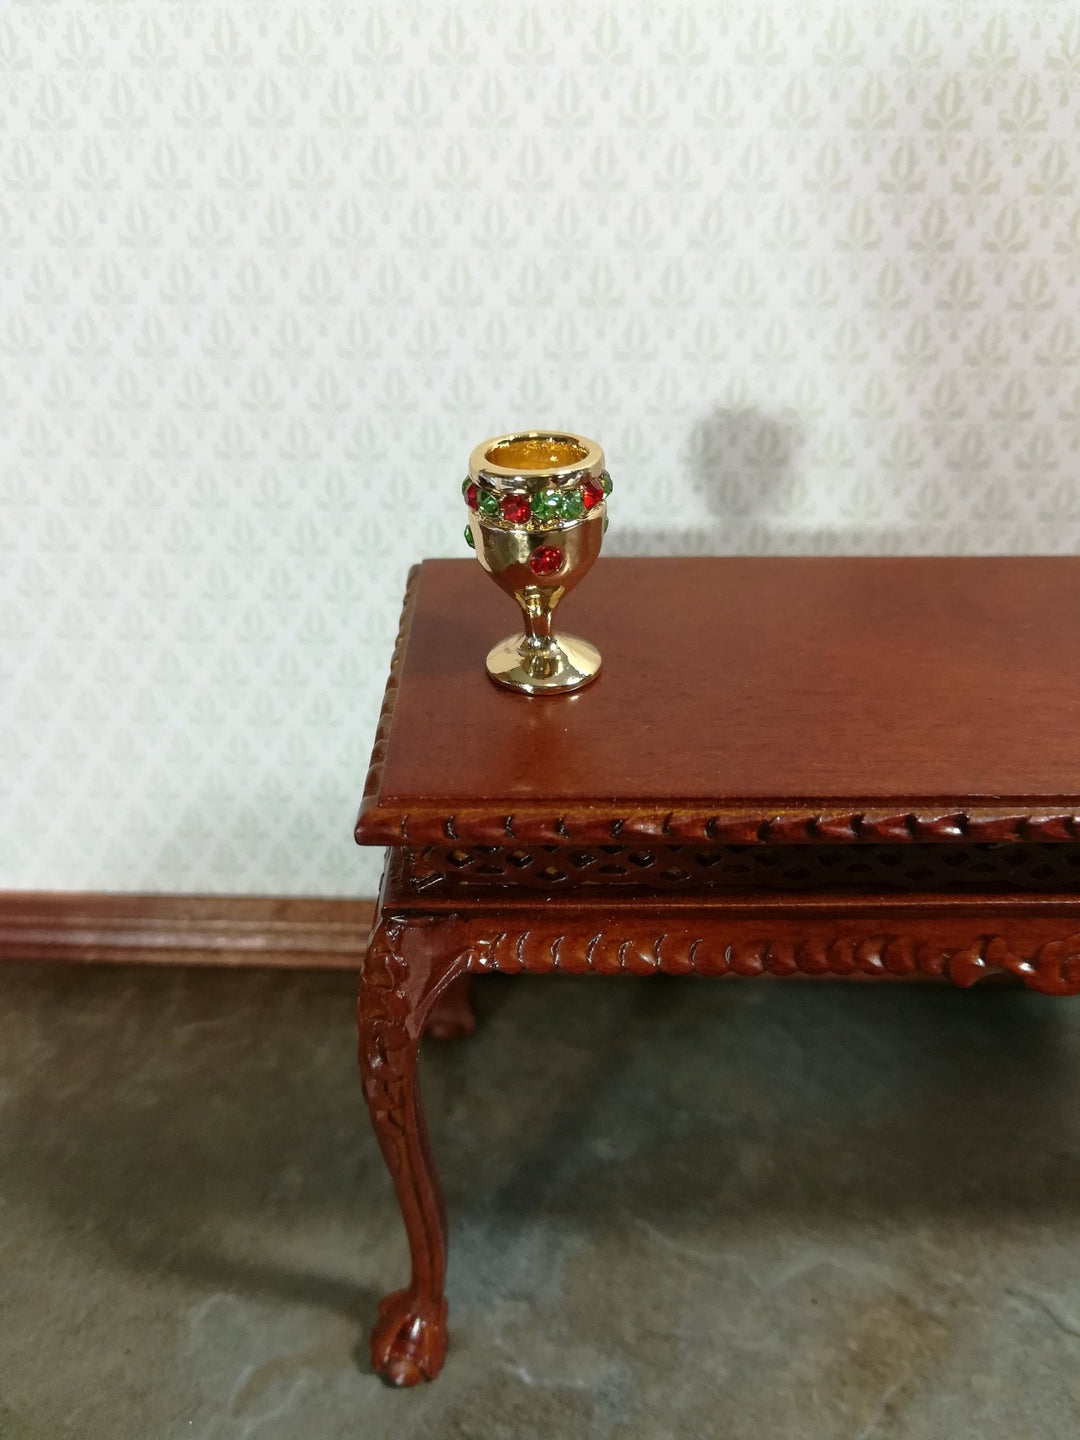 Dollhouse Miniature Chalice Goblet Large "Gold" with Jewels 1:12 Scale - Miniature Crush